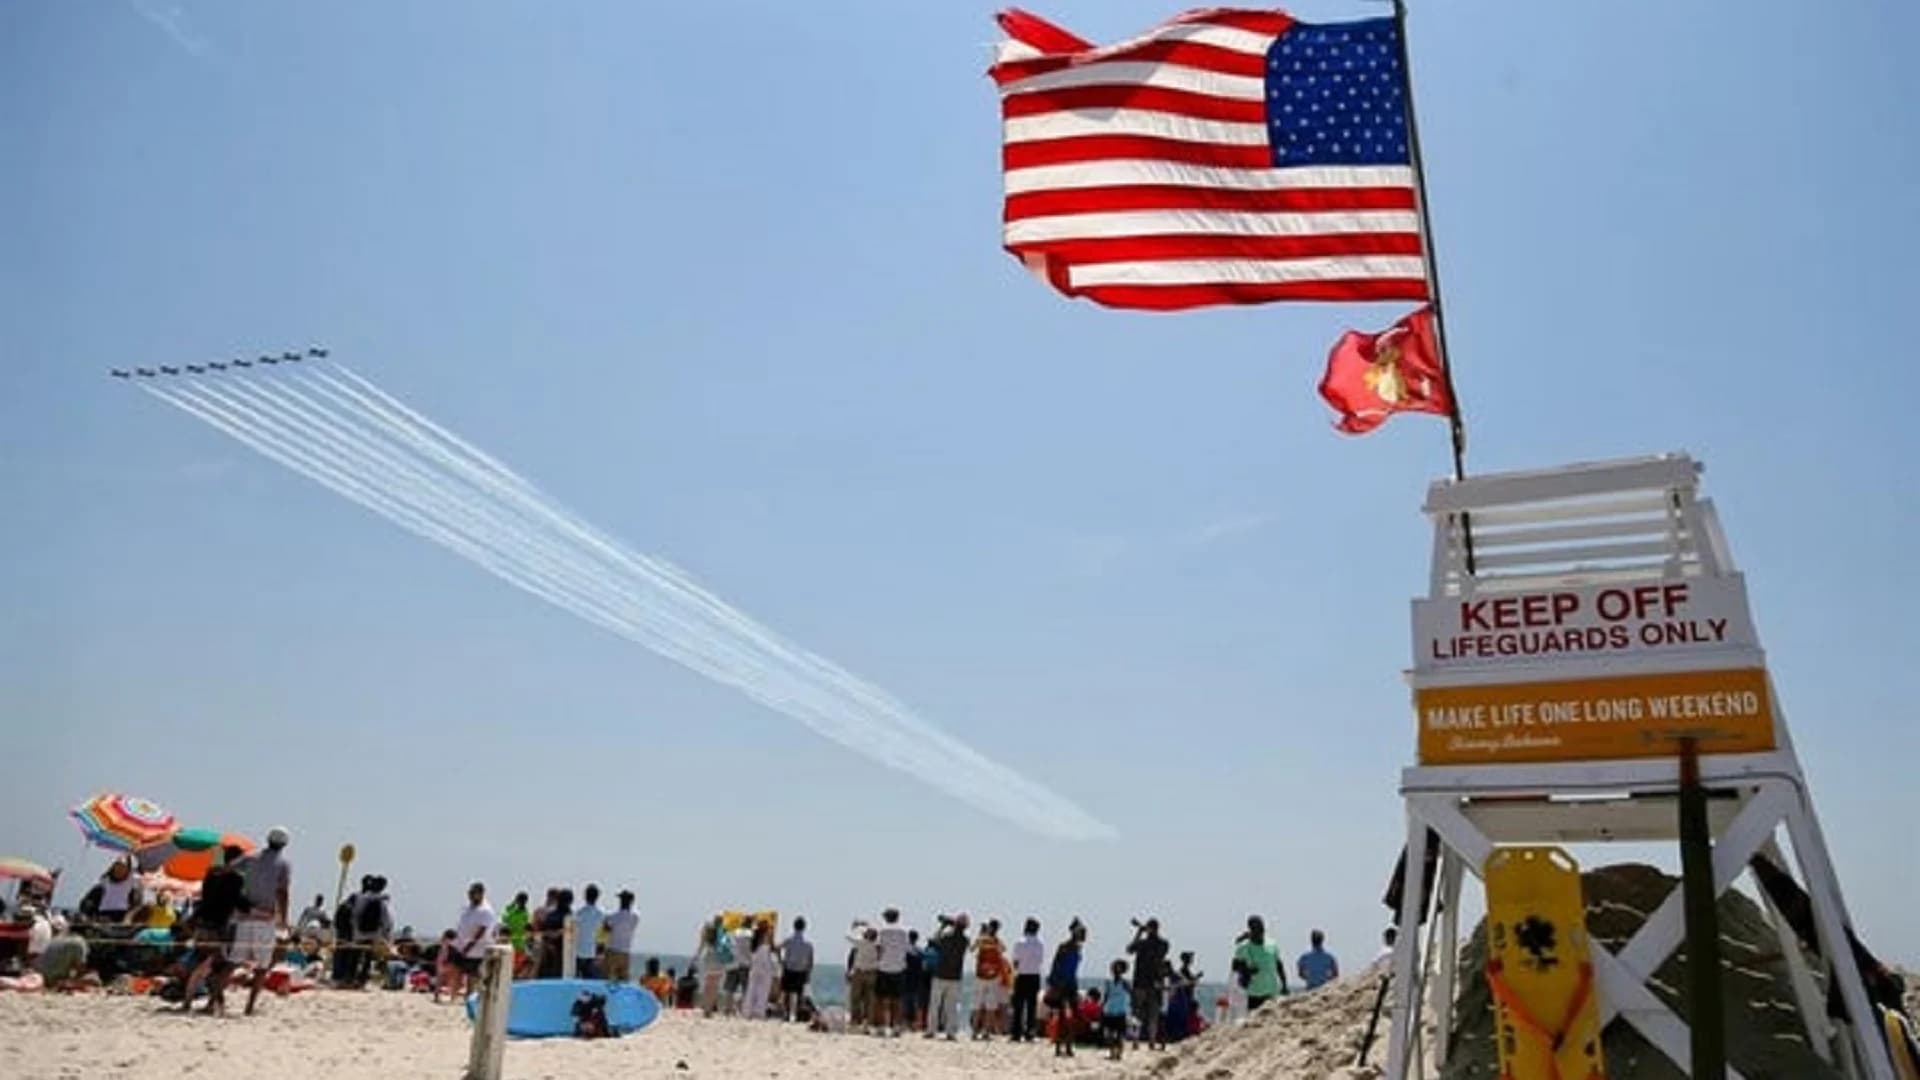 Guide: 2021 Bethpage Air Show at Jones Beach